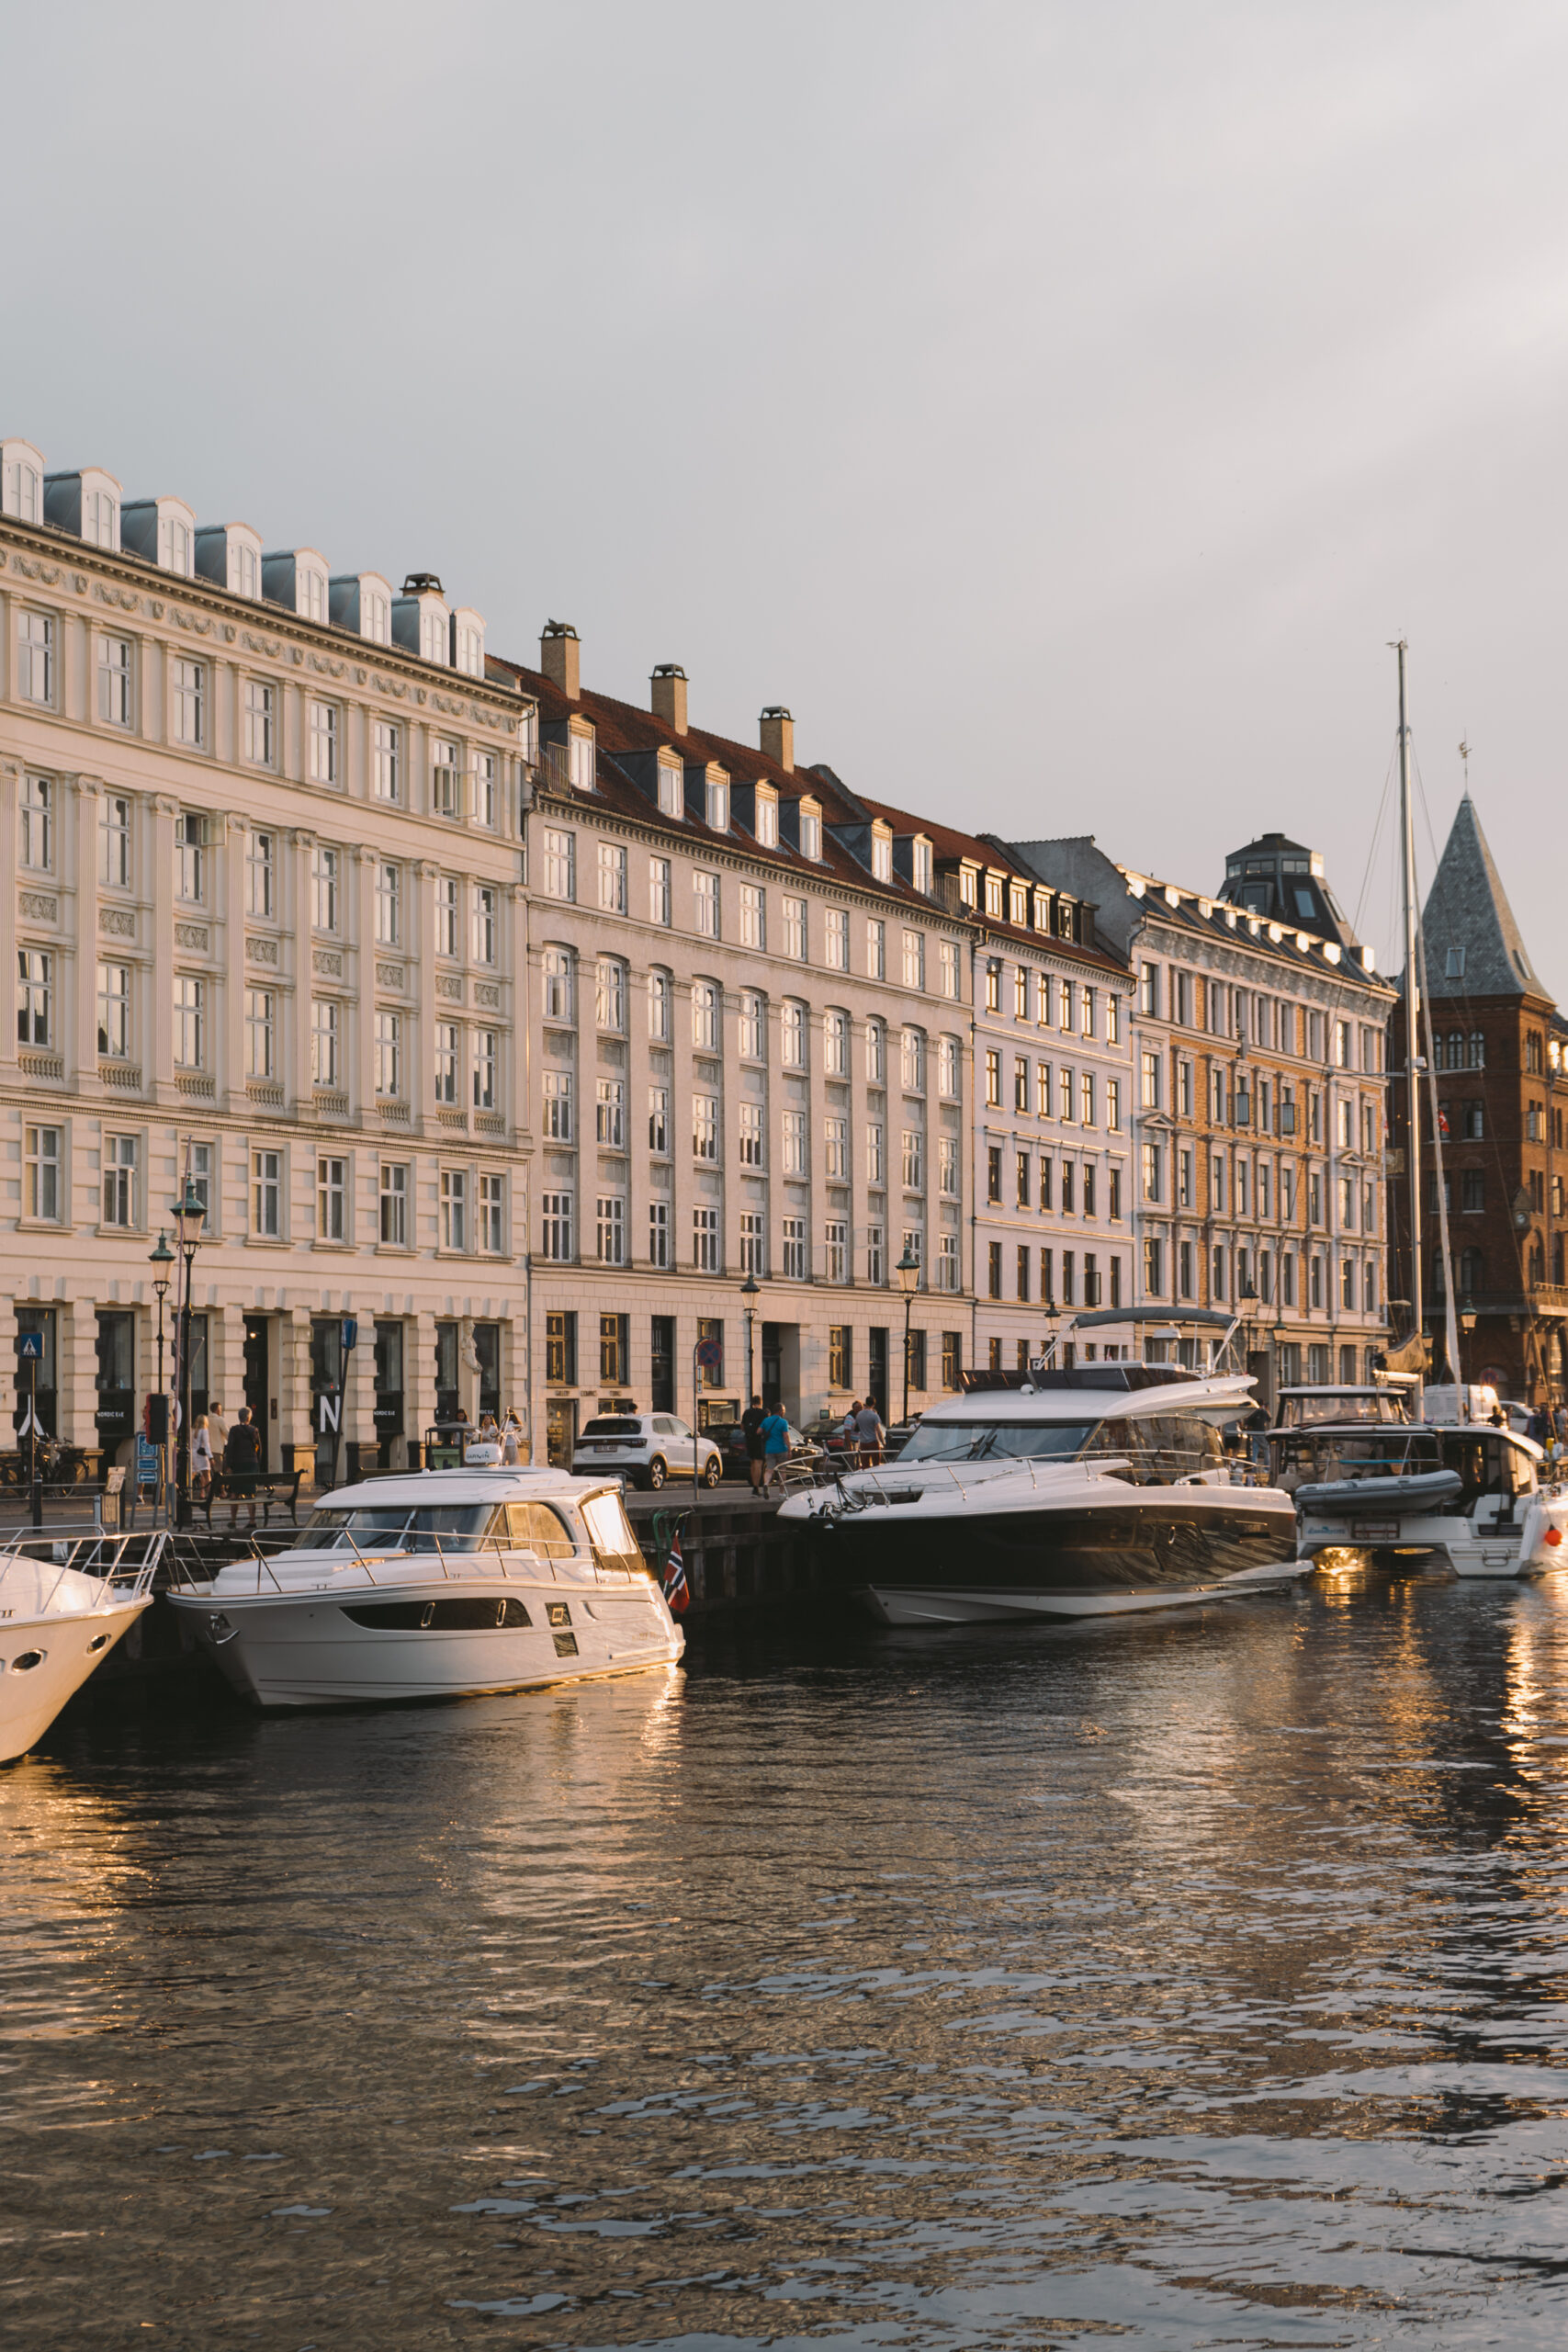 A guide to Denmark's capital city